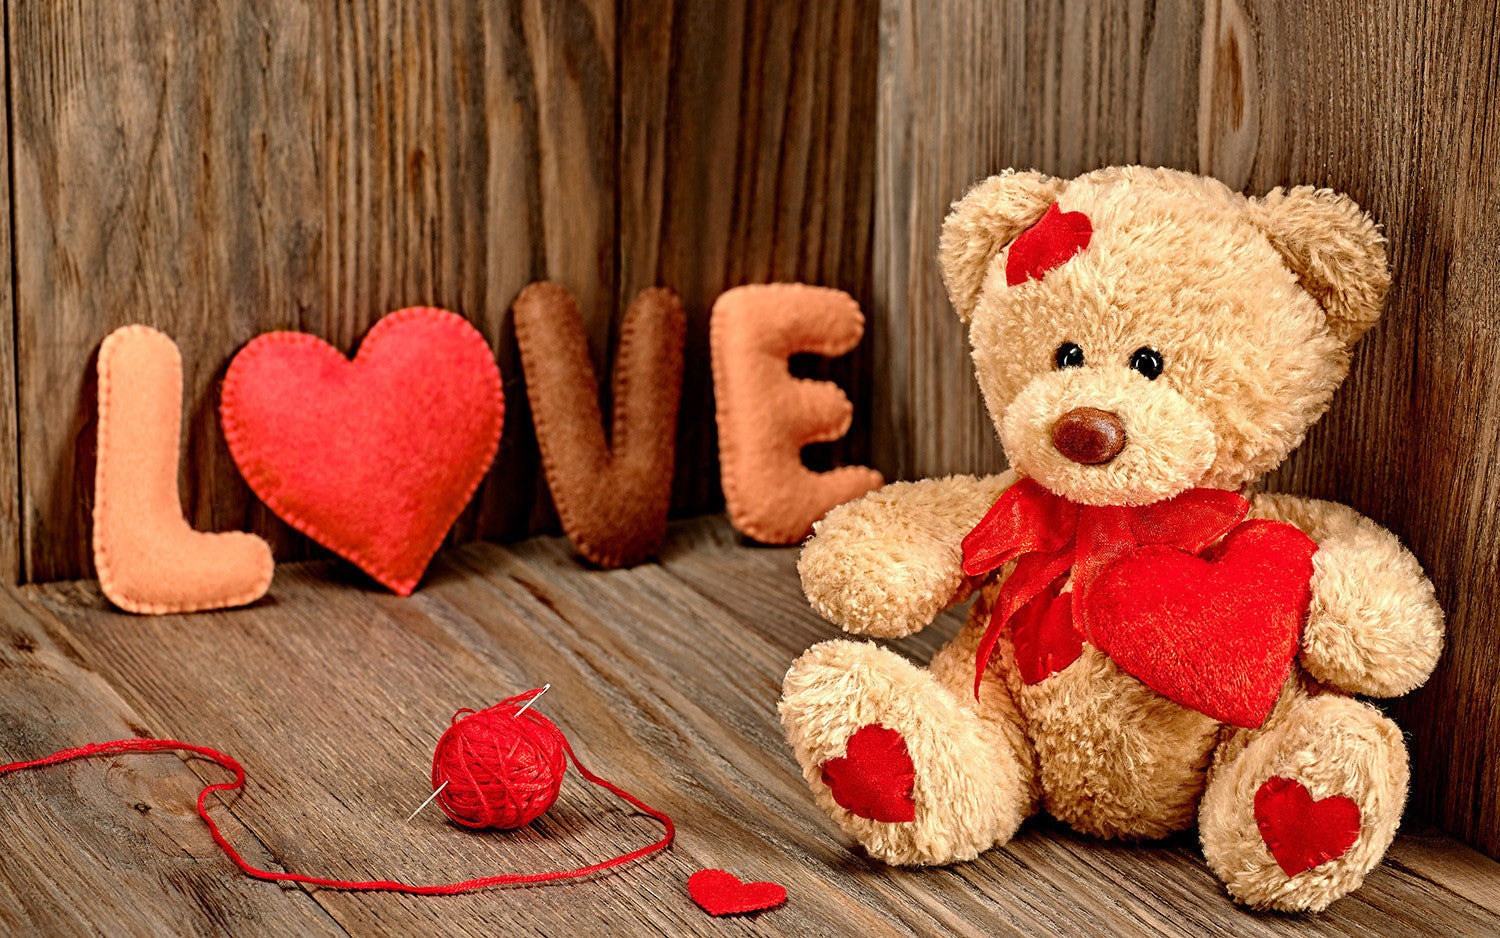 Valentine's day: Teddy is not a toy.. it is a representation of love